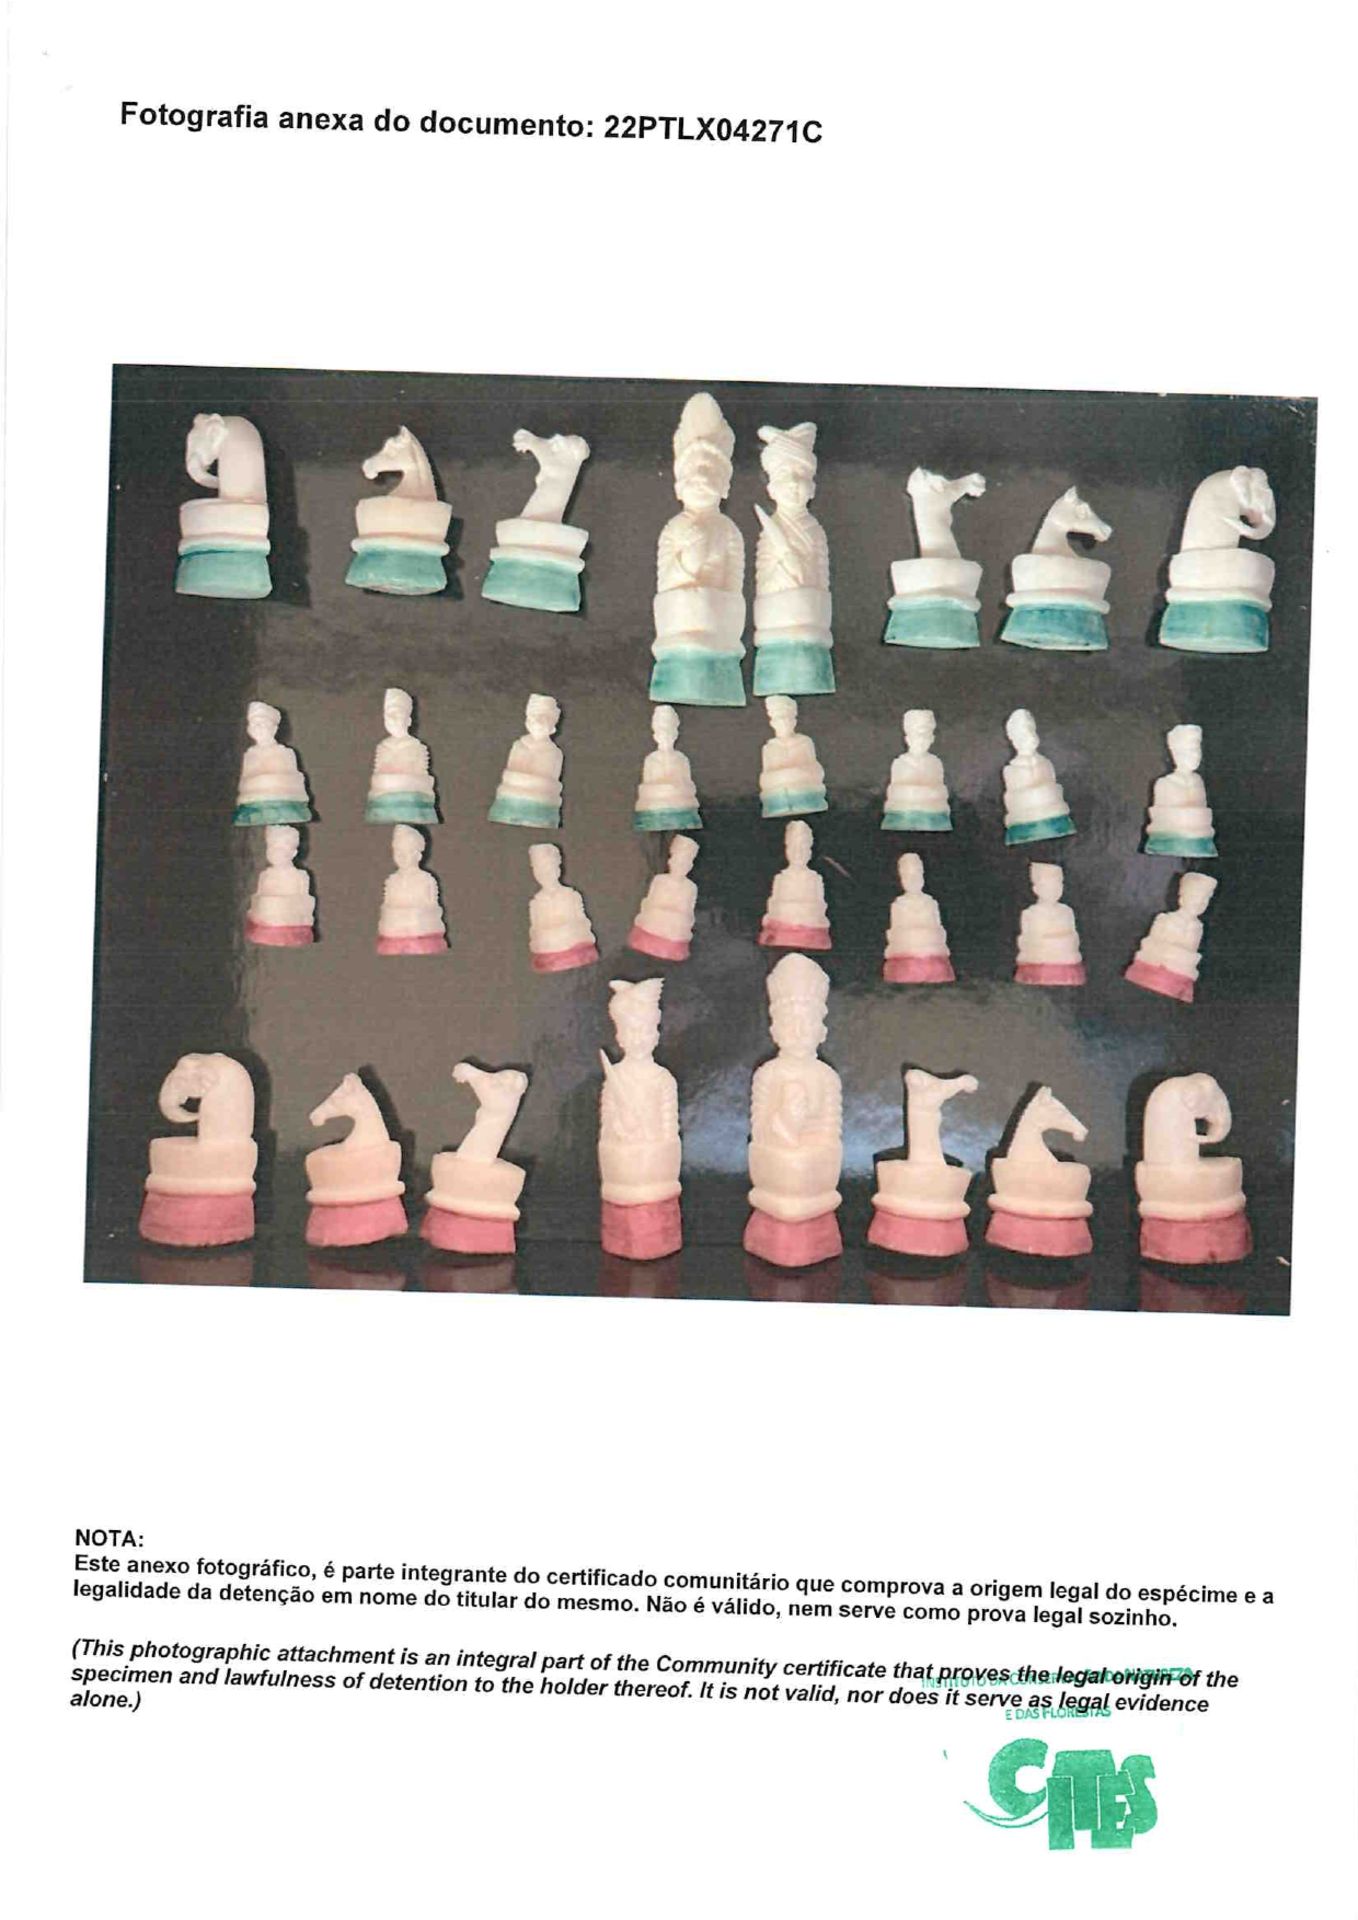 Chess pieces - Image 9 of 9